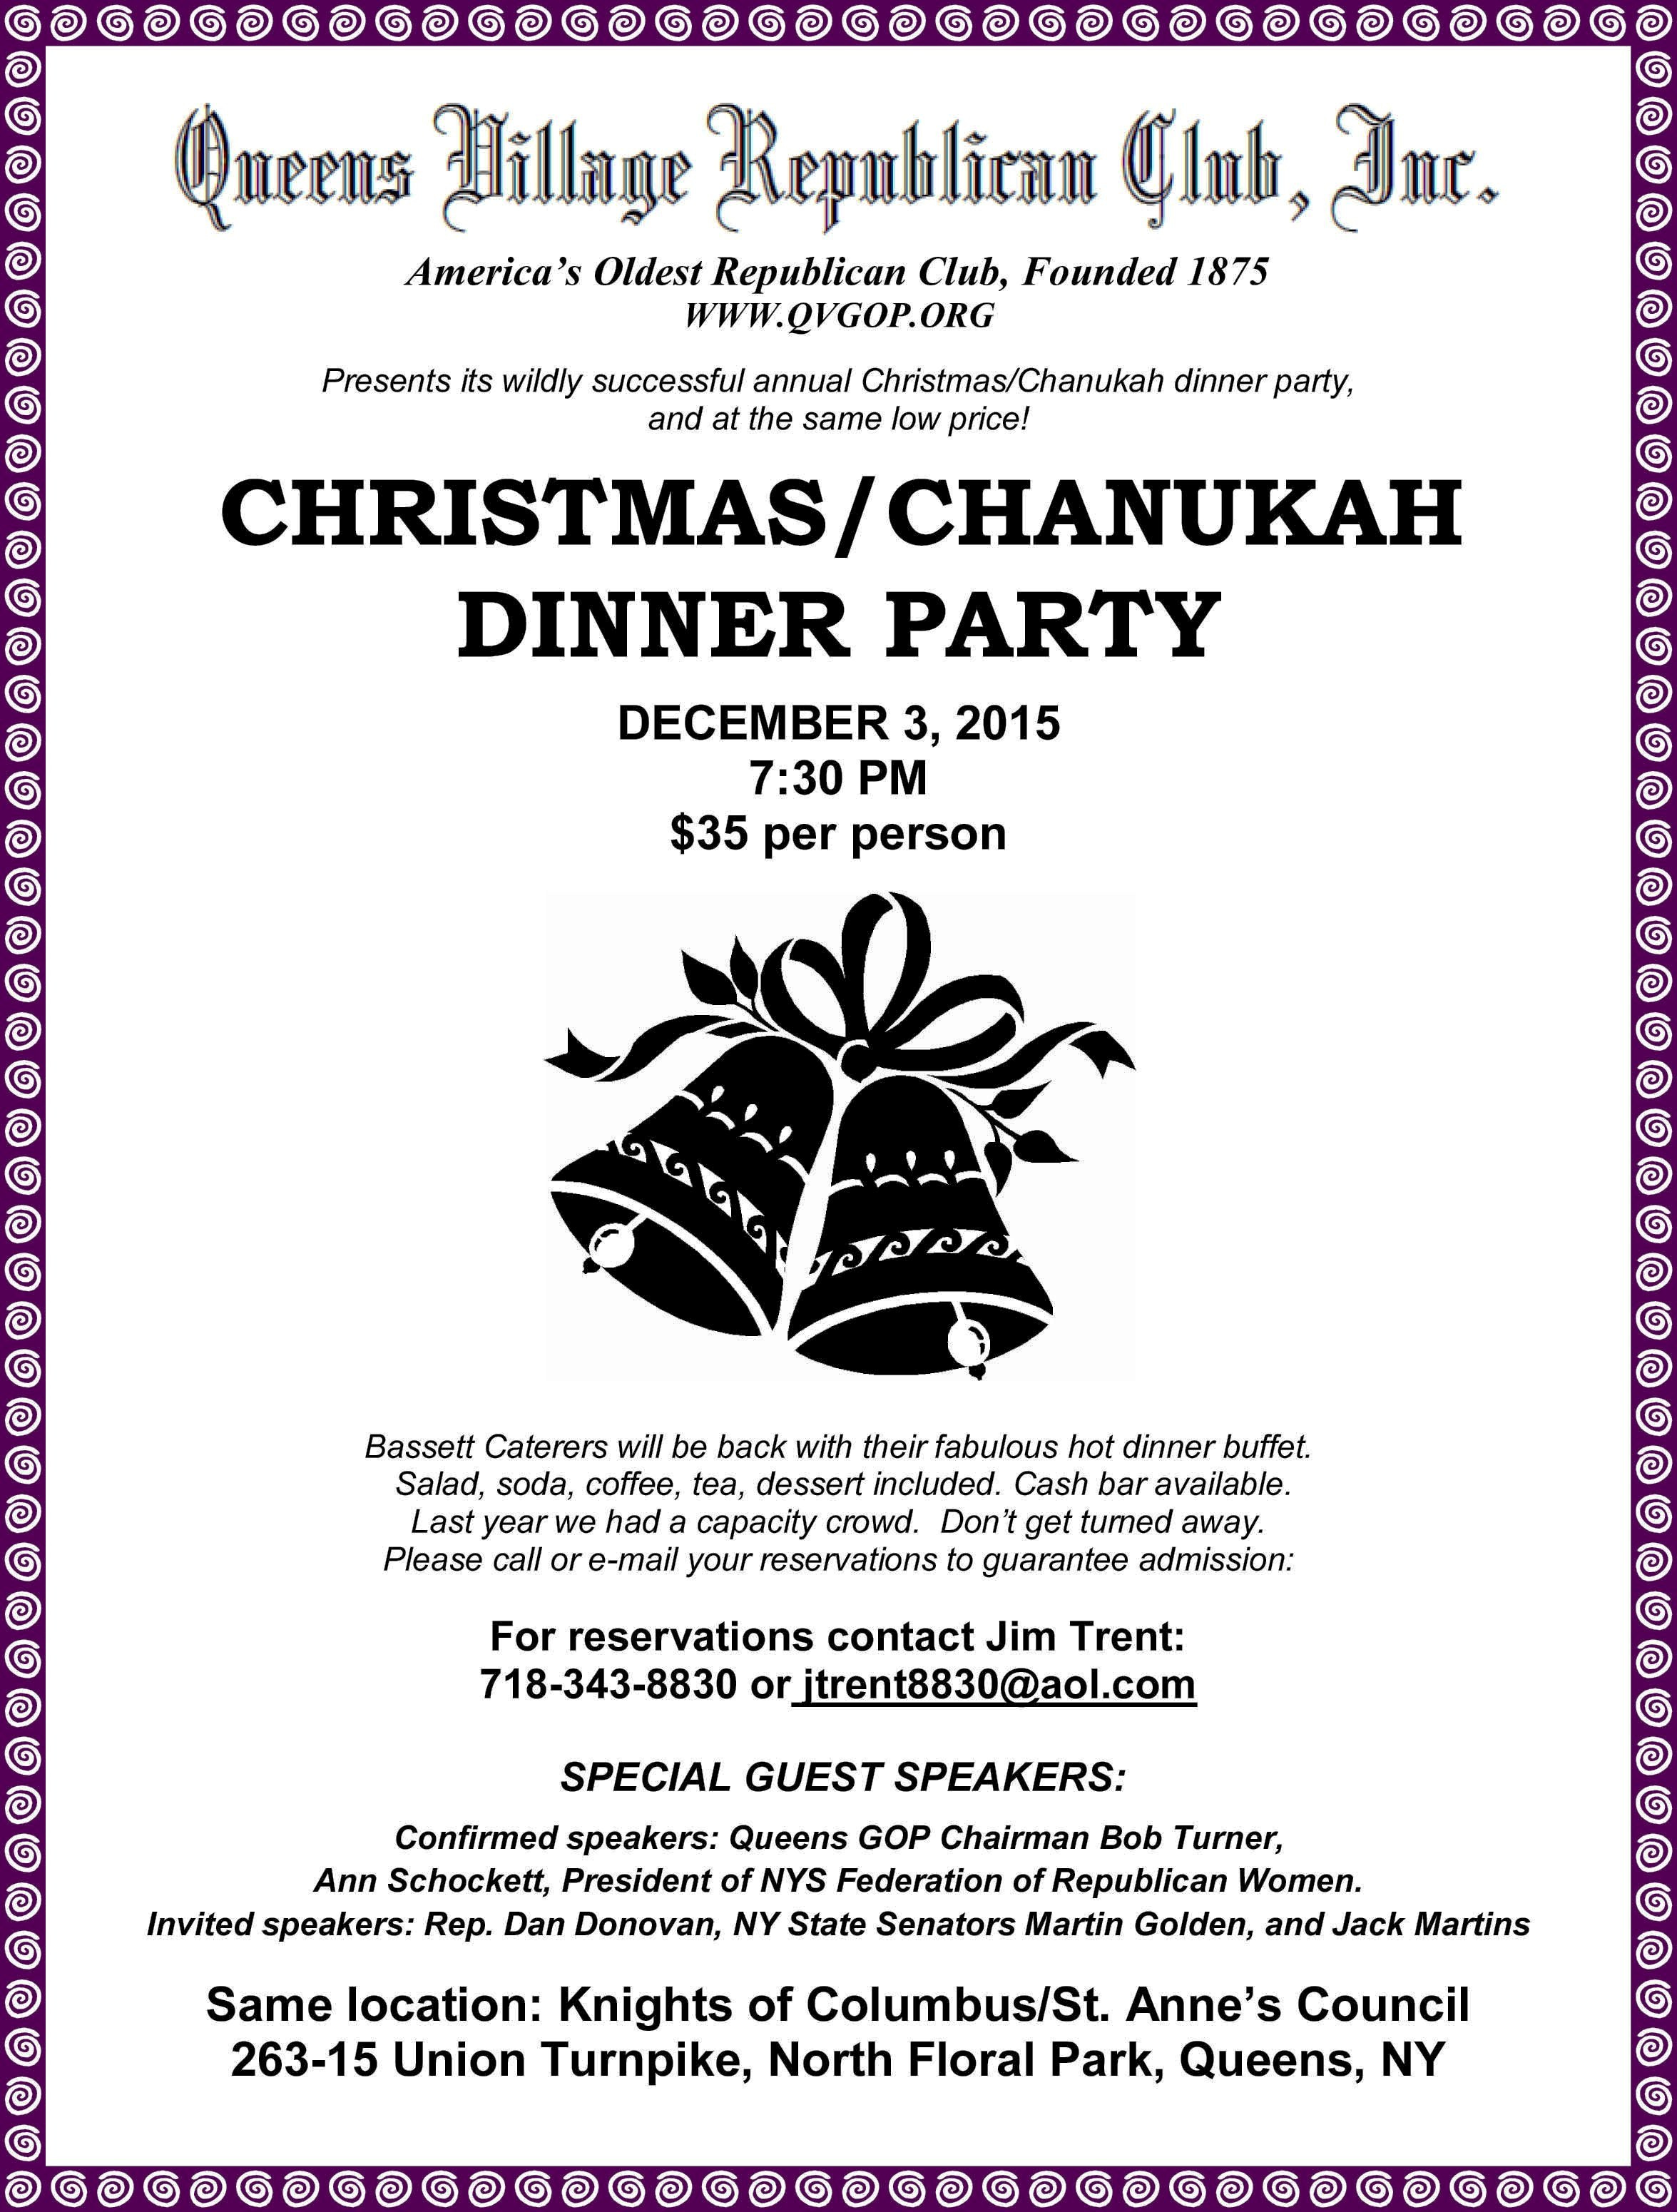 Christmas Party flyer